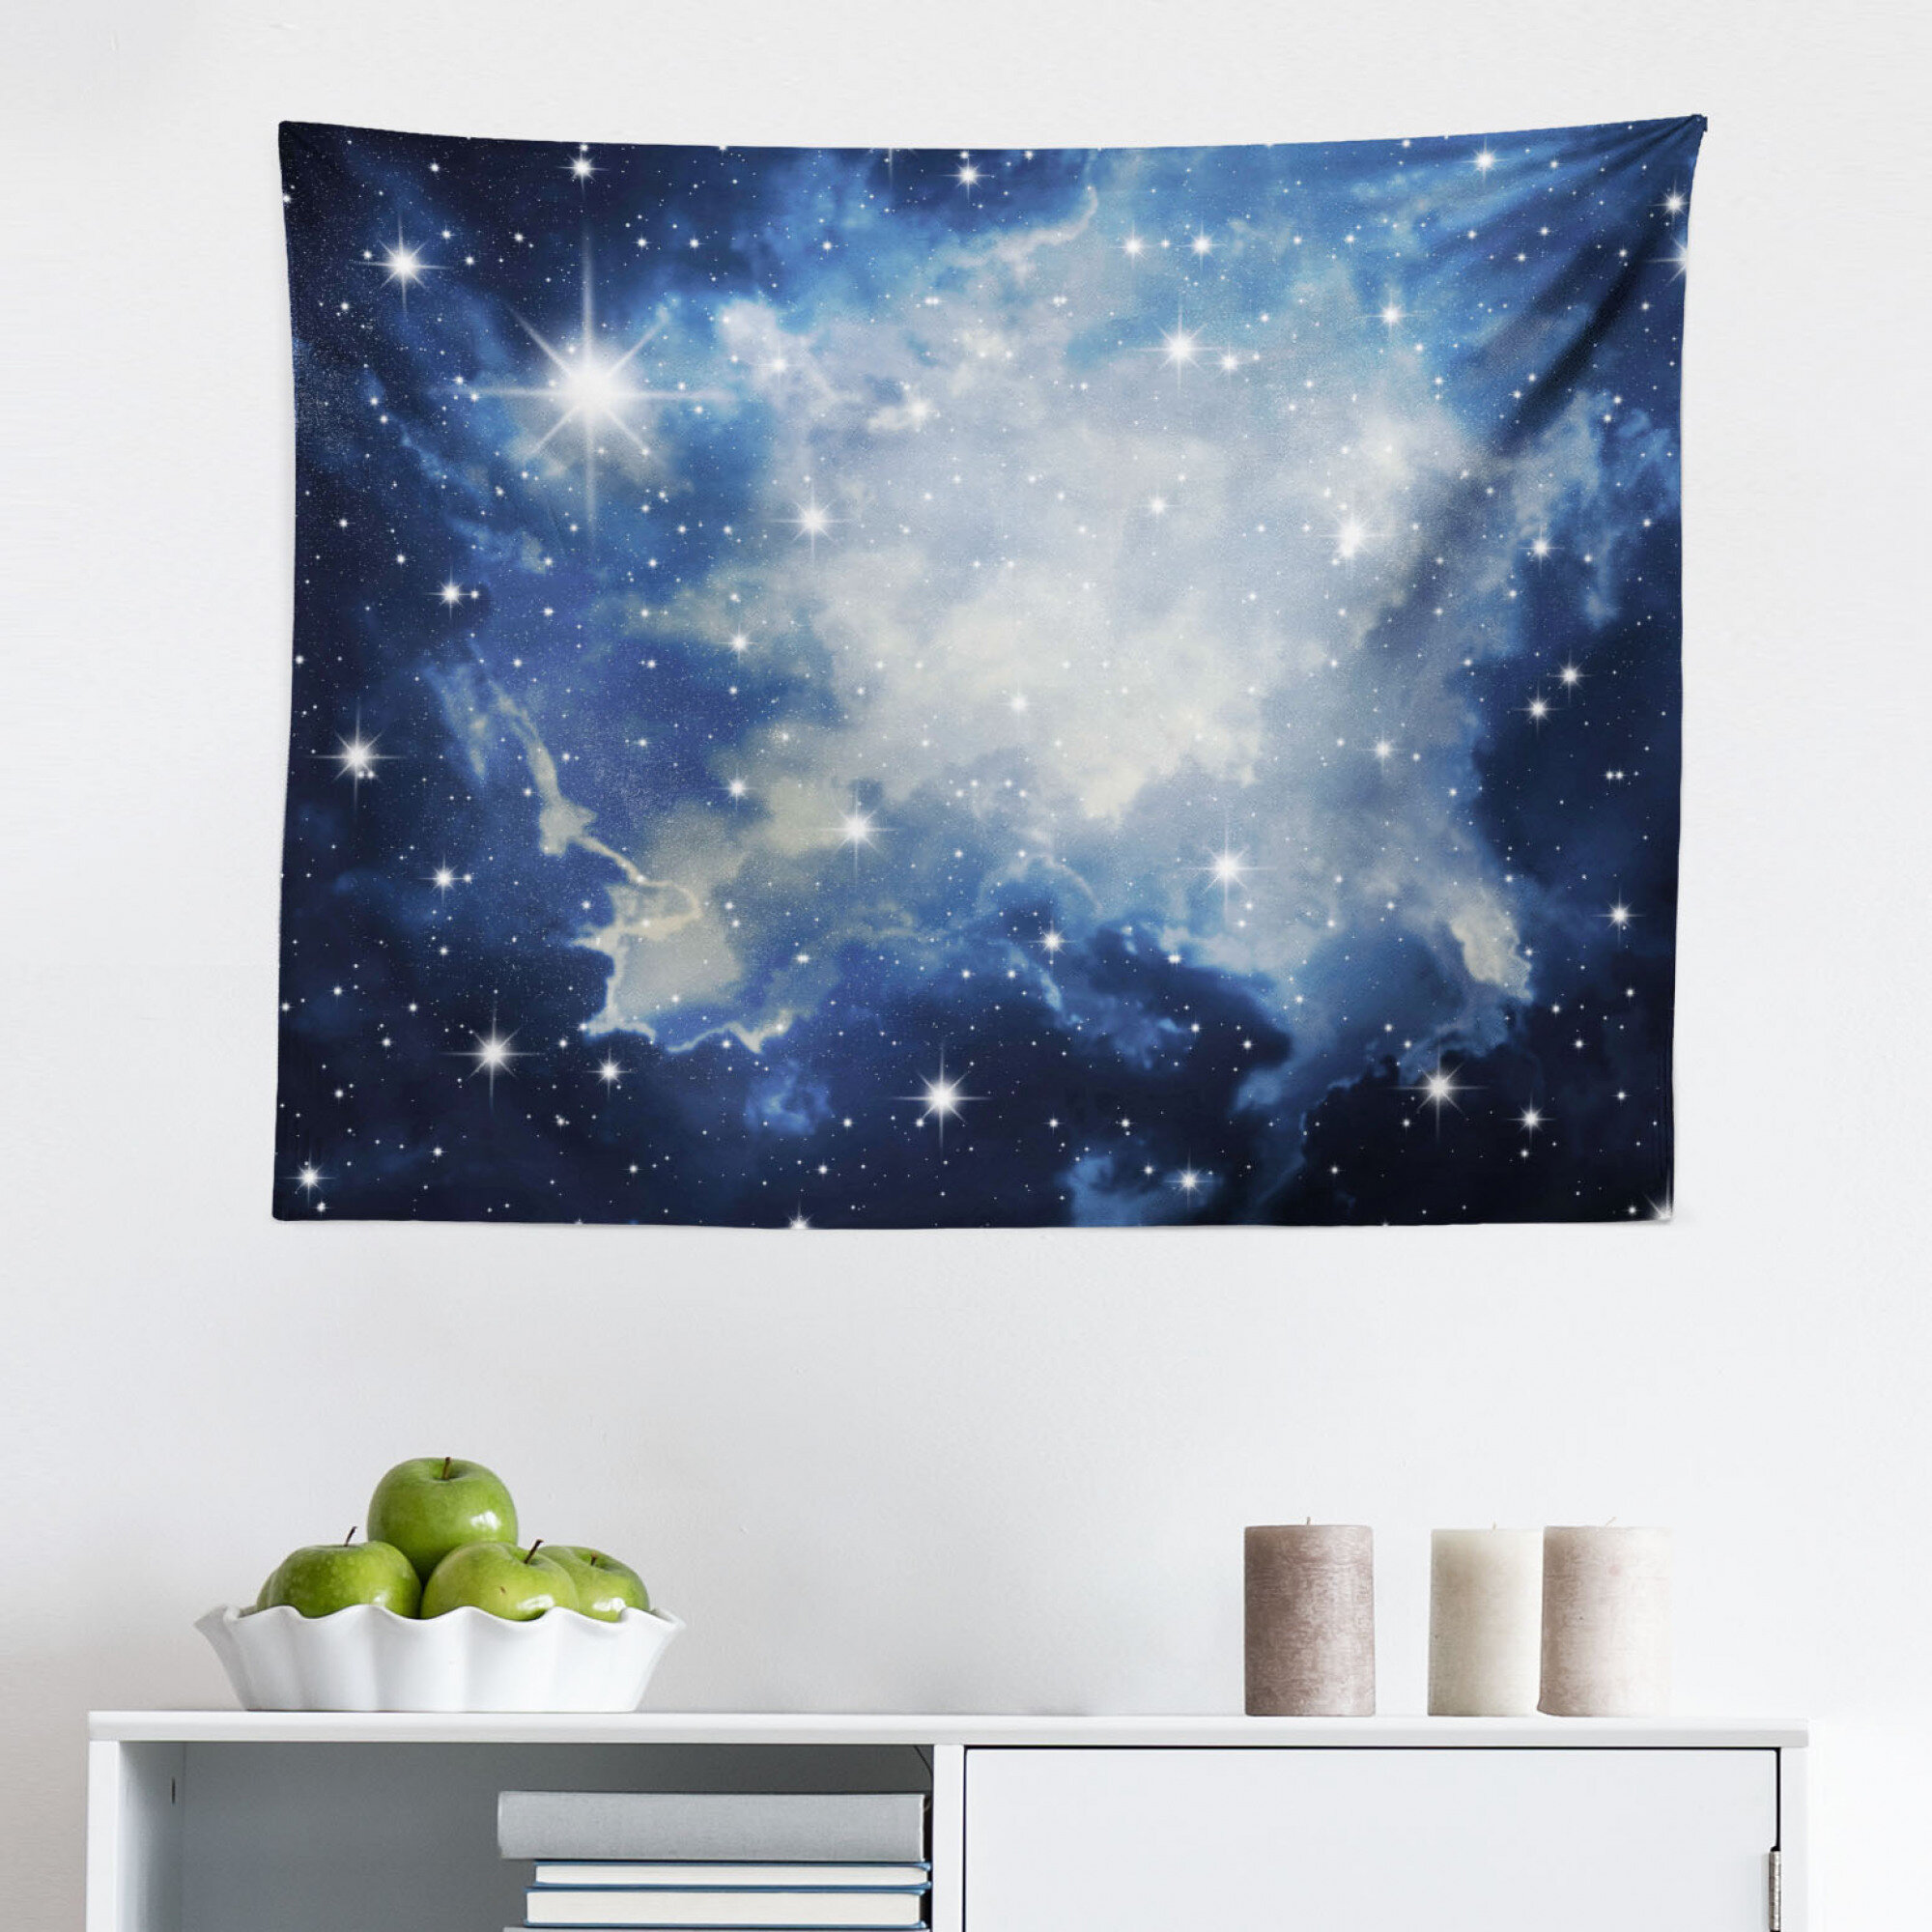 Galaxy Starry Sky Scenery Tapestry Wall Hanging Home Art Tapestries DIY Decor 